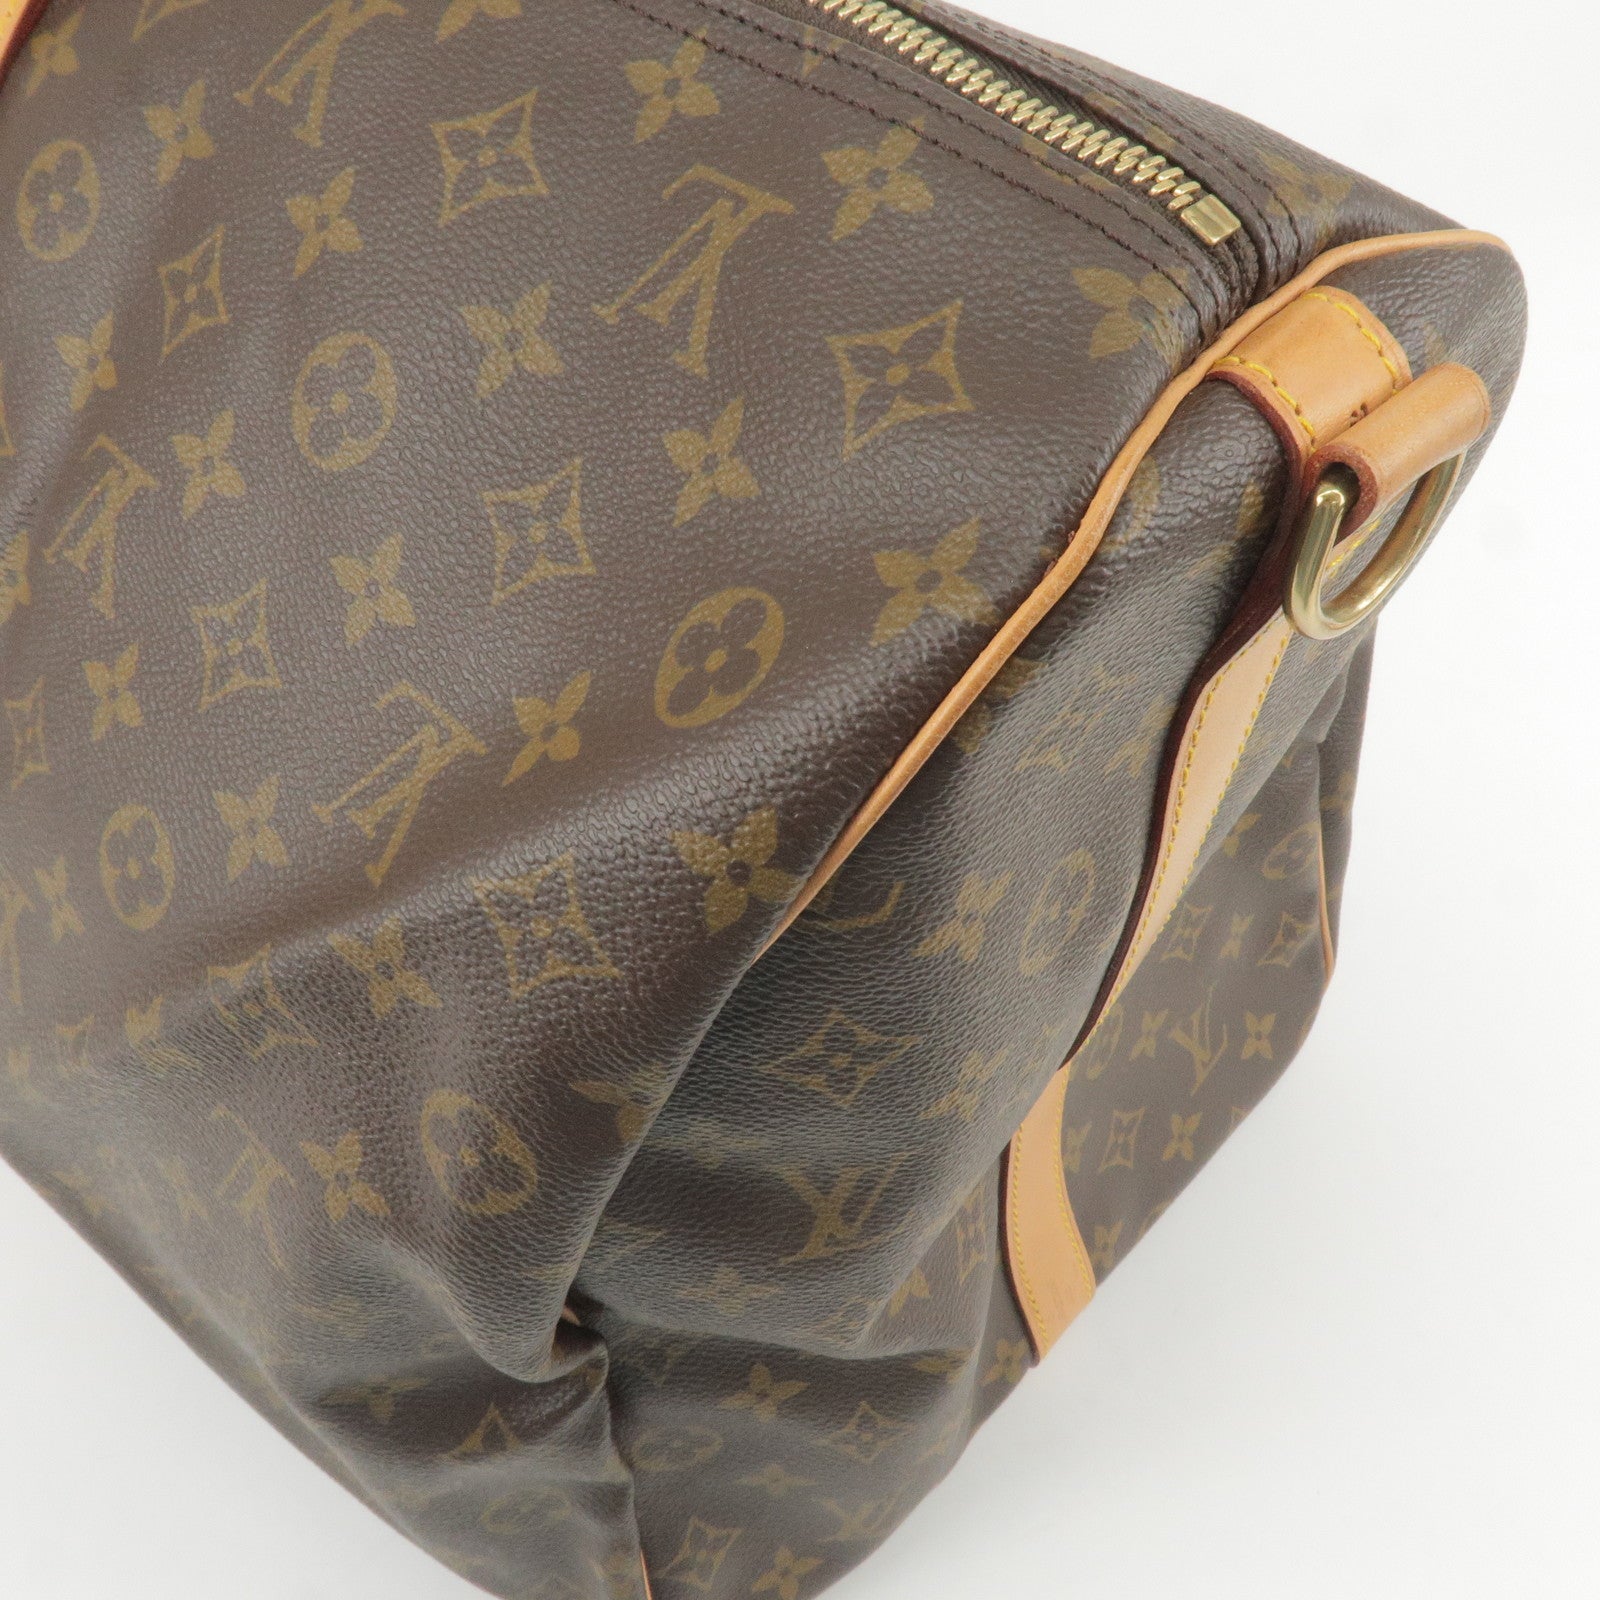 Louis Vuitton 2006 pre-owned Limited Edition Speedy 30 Bag - Farfetch